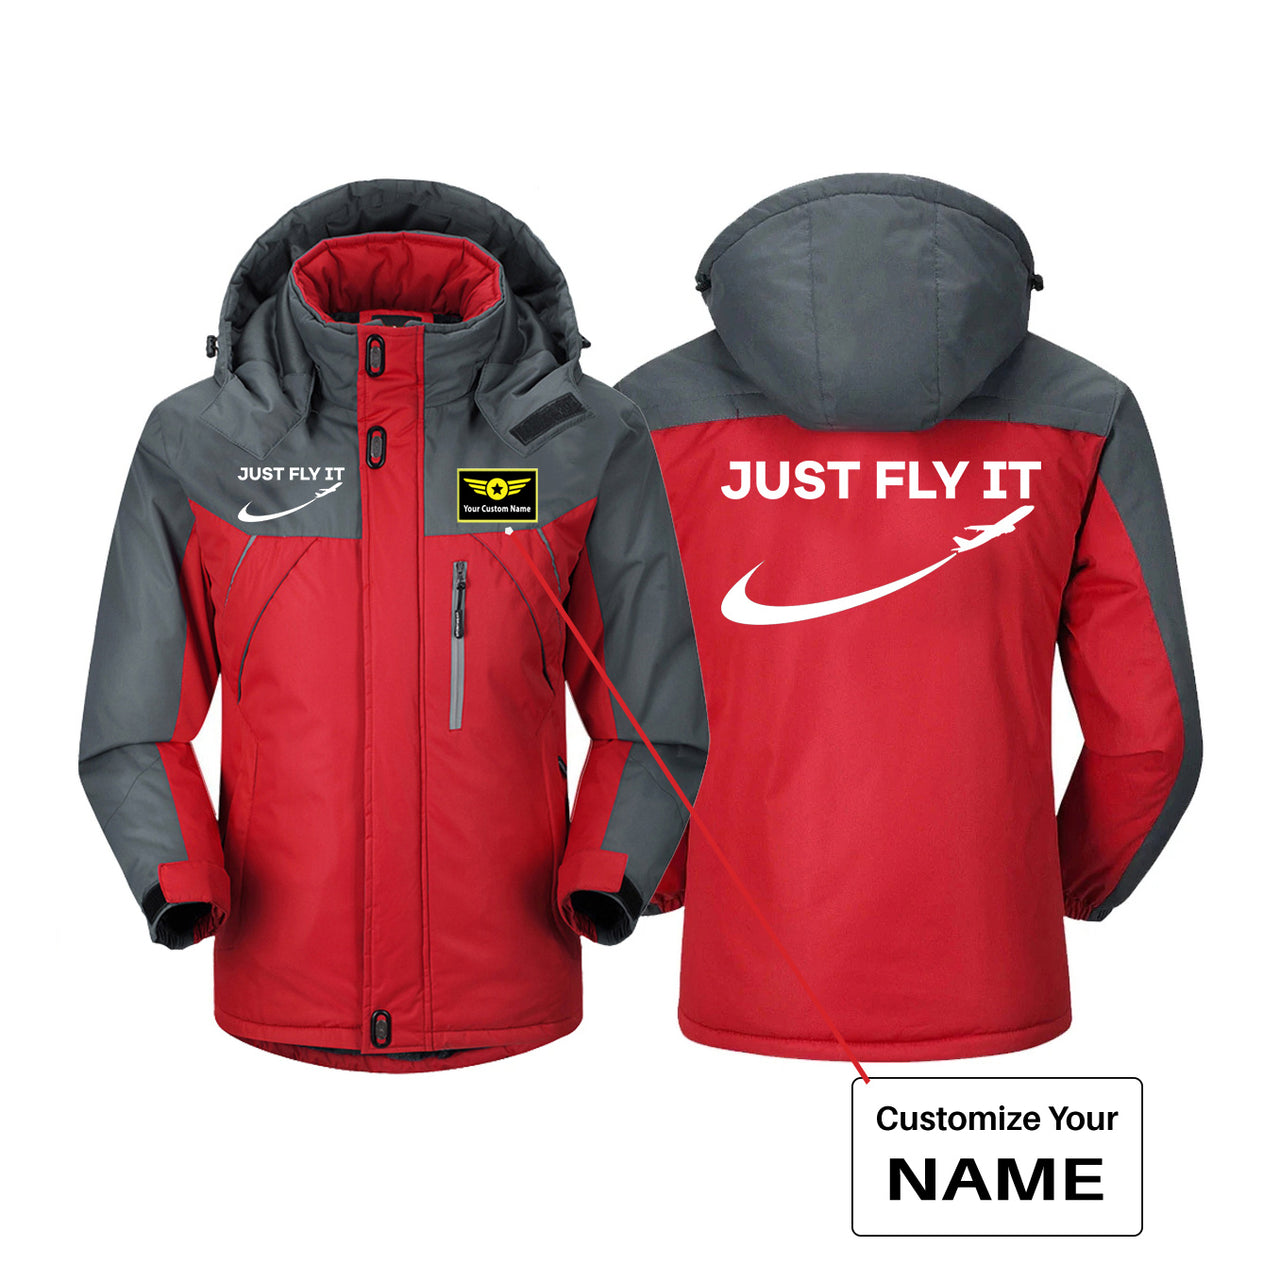 Just Fly It 2 Designed Thick Winter Jackets